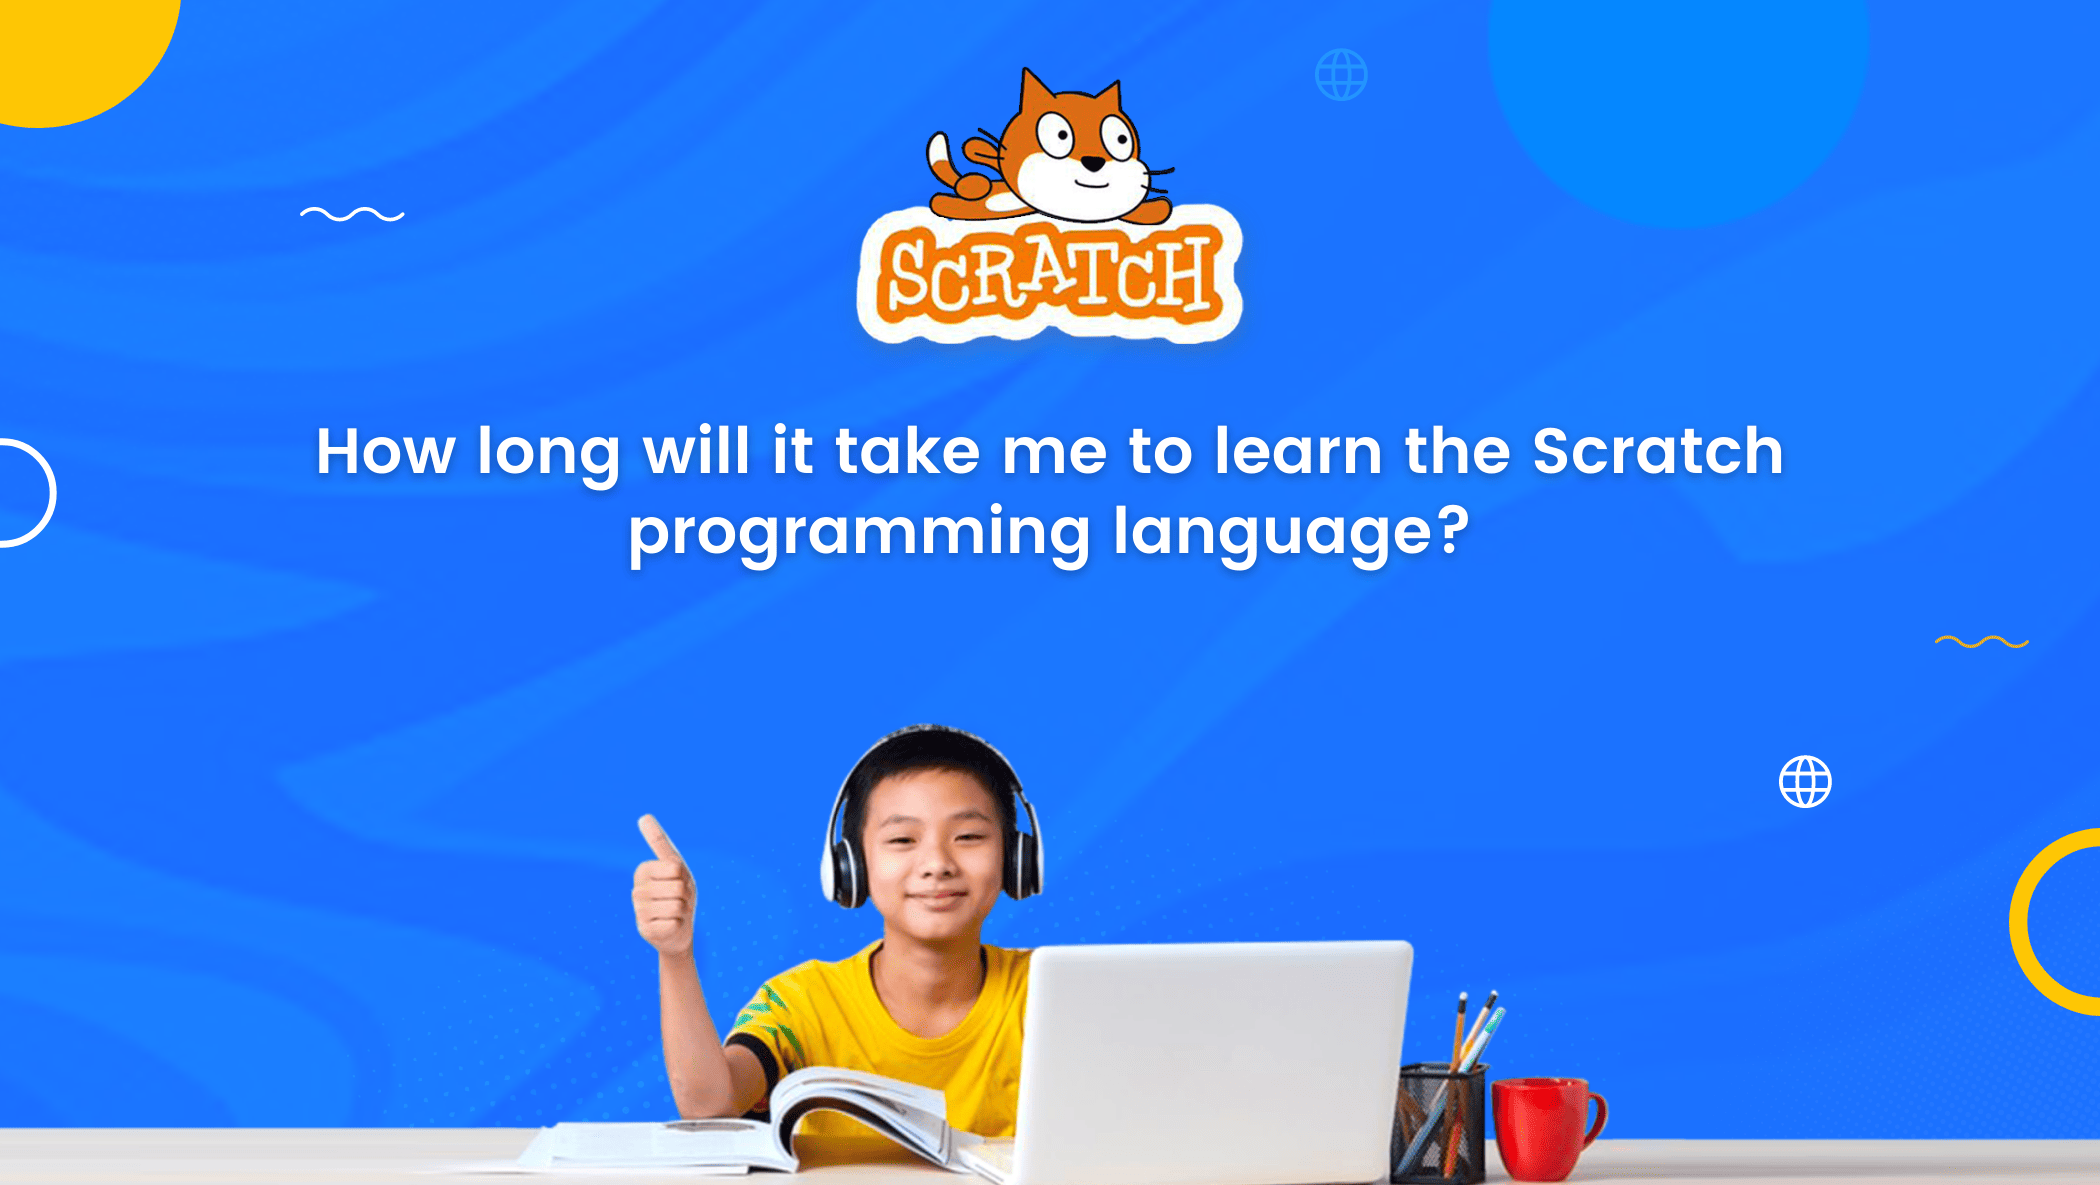 How long will it take me to learn the Scratch programming language